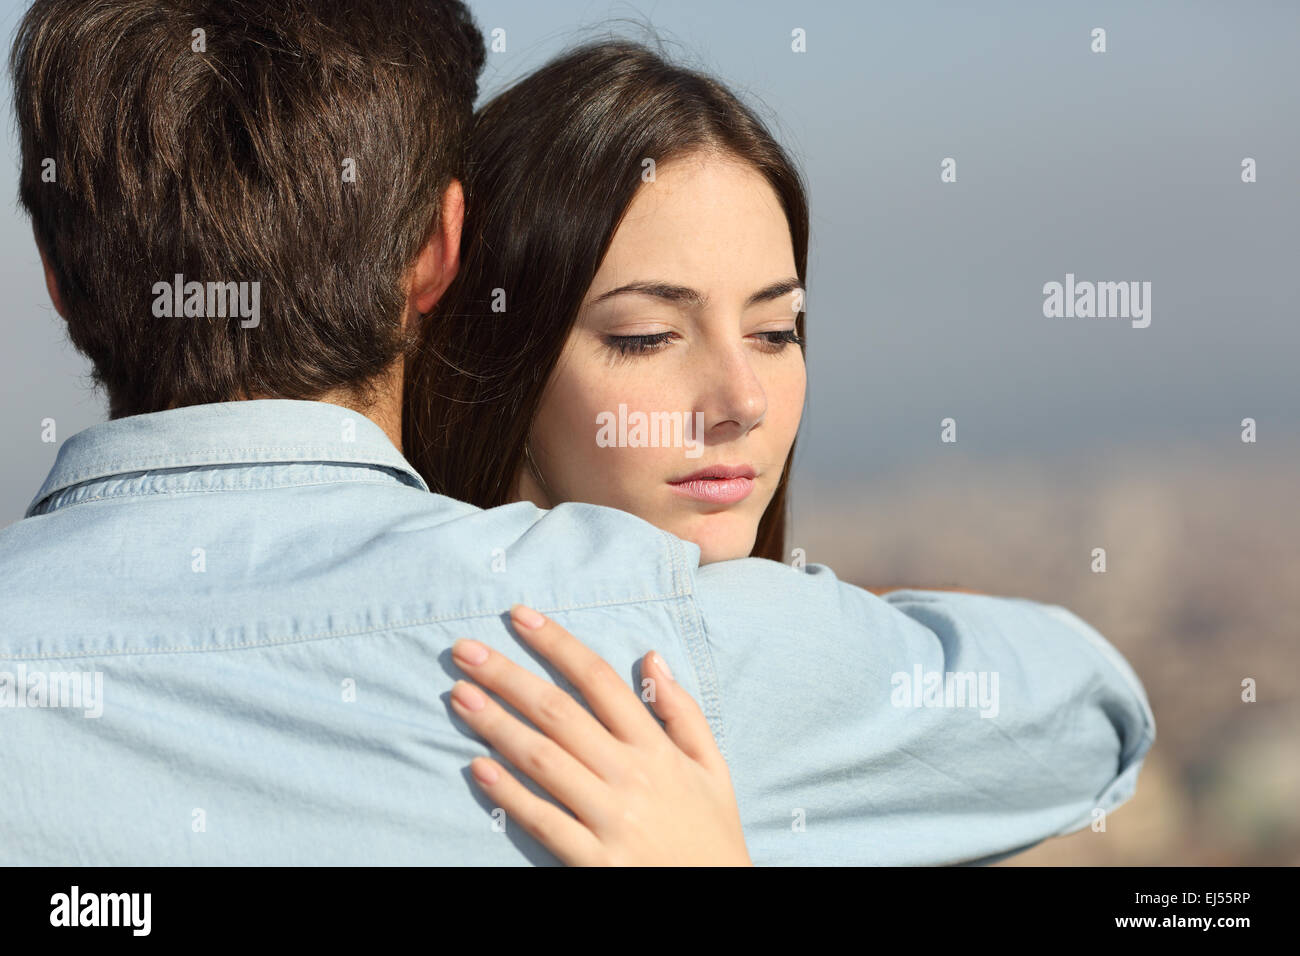 Sad woman hugging her boyfriend and looking down couple problems concept Stock Photo